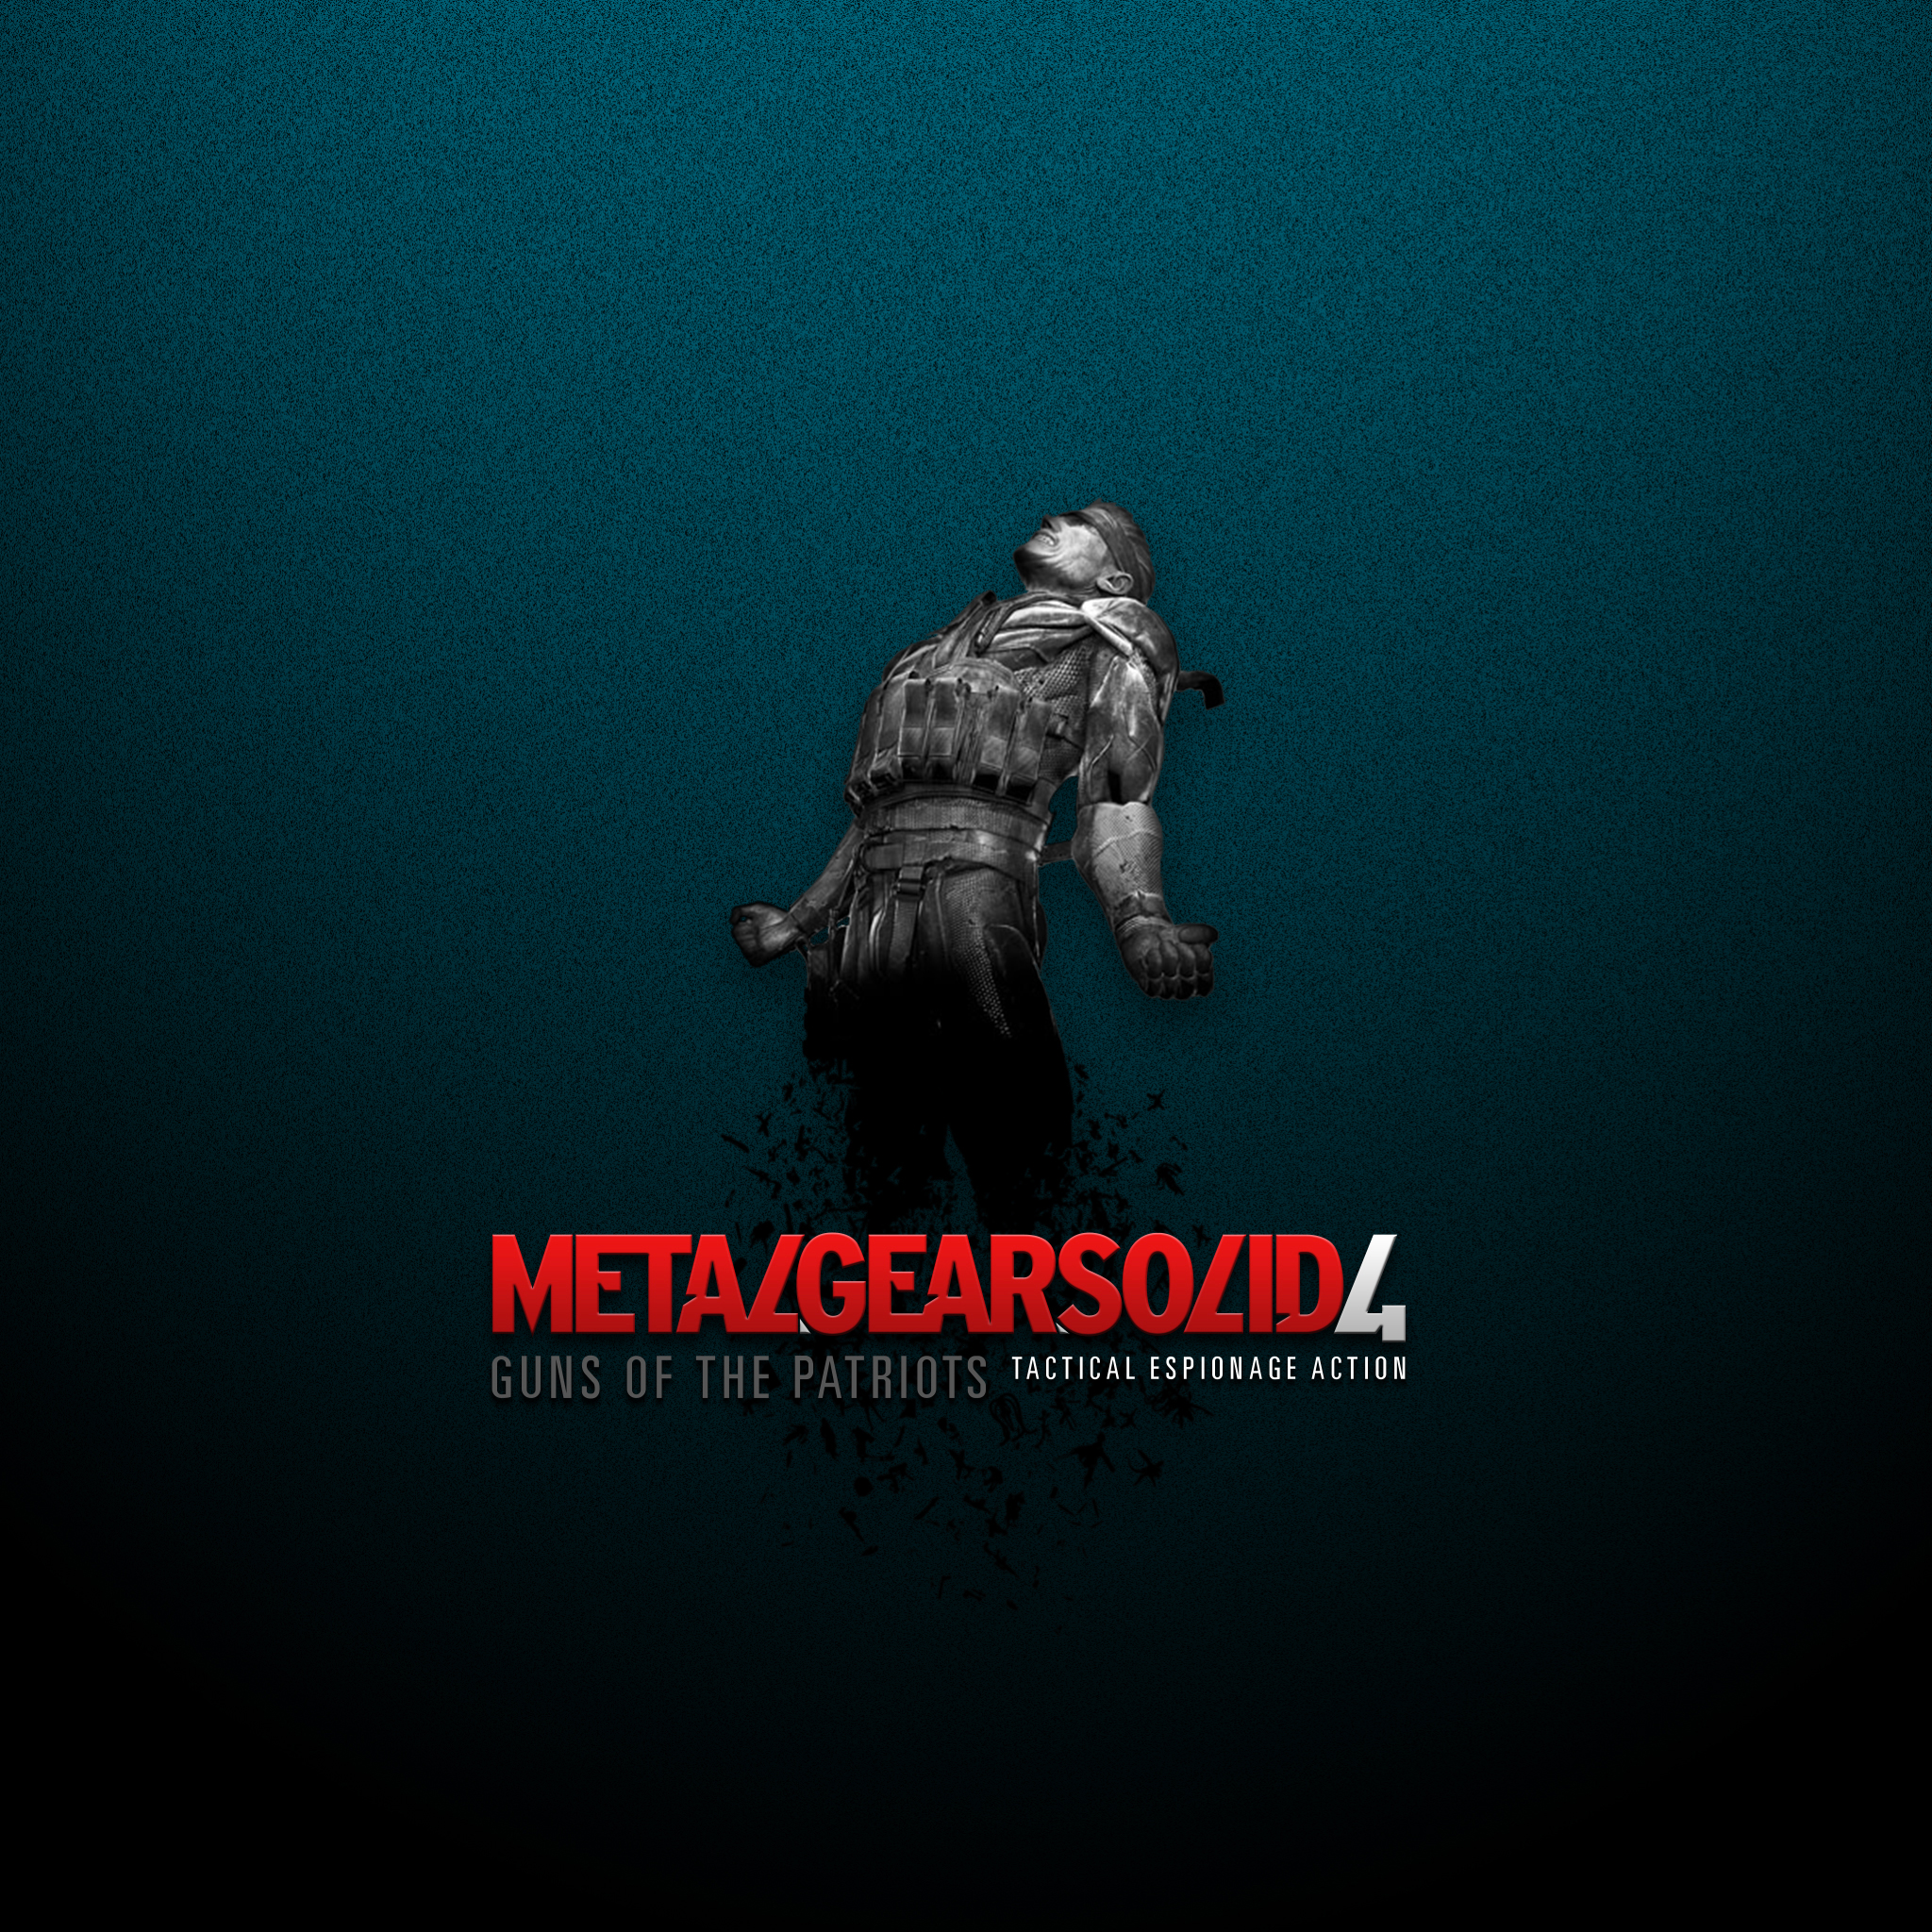 Wallpaper A Day Only Retina iPhone New iPad Metal Gear